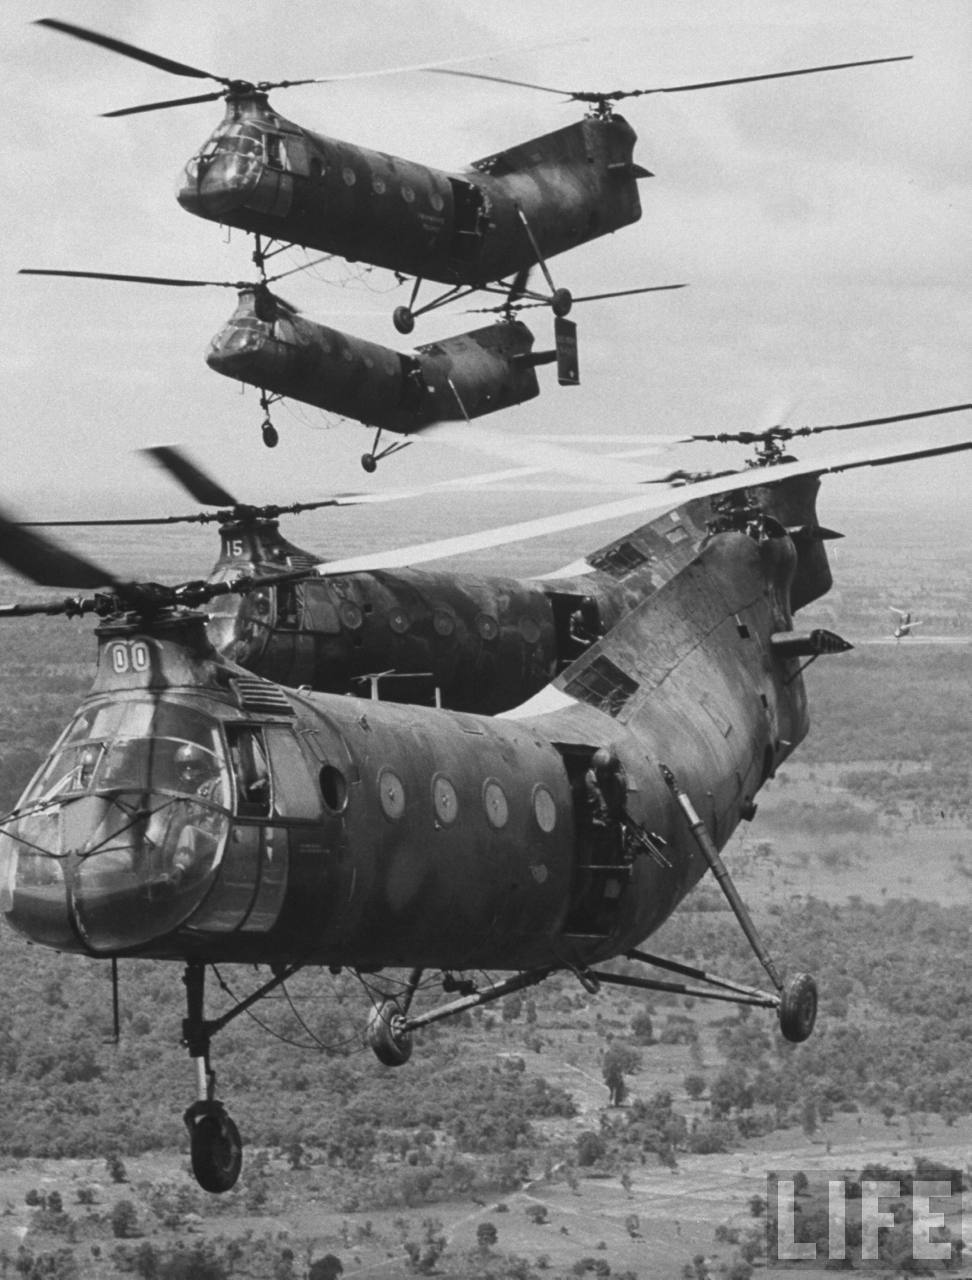 A flight of U.S. Army CH-21C Shawnee helicopters over South Vietnam, 1962. (LIFE Magazine)